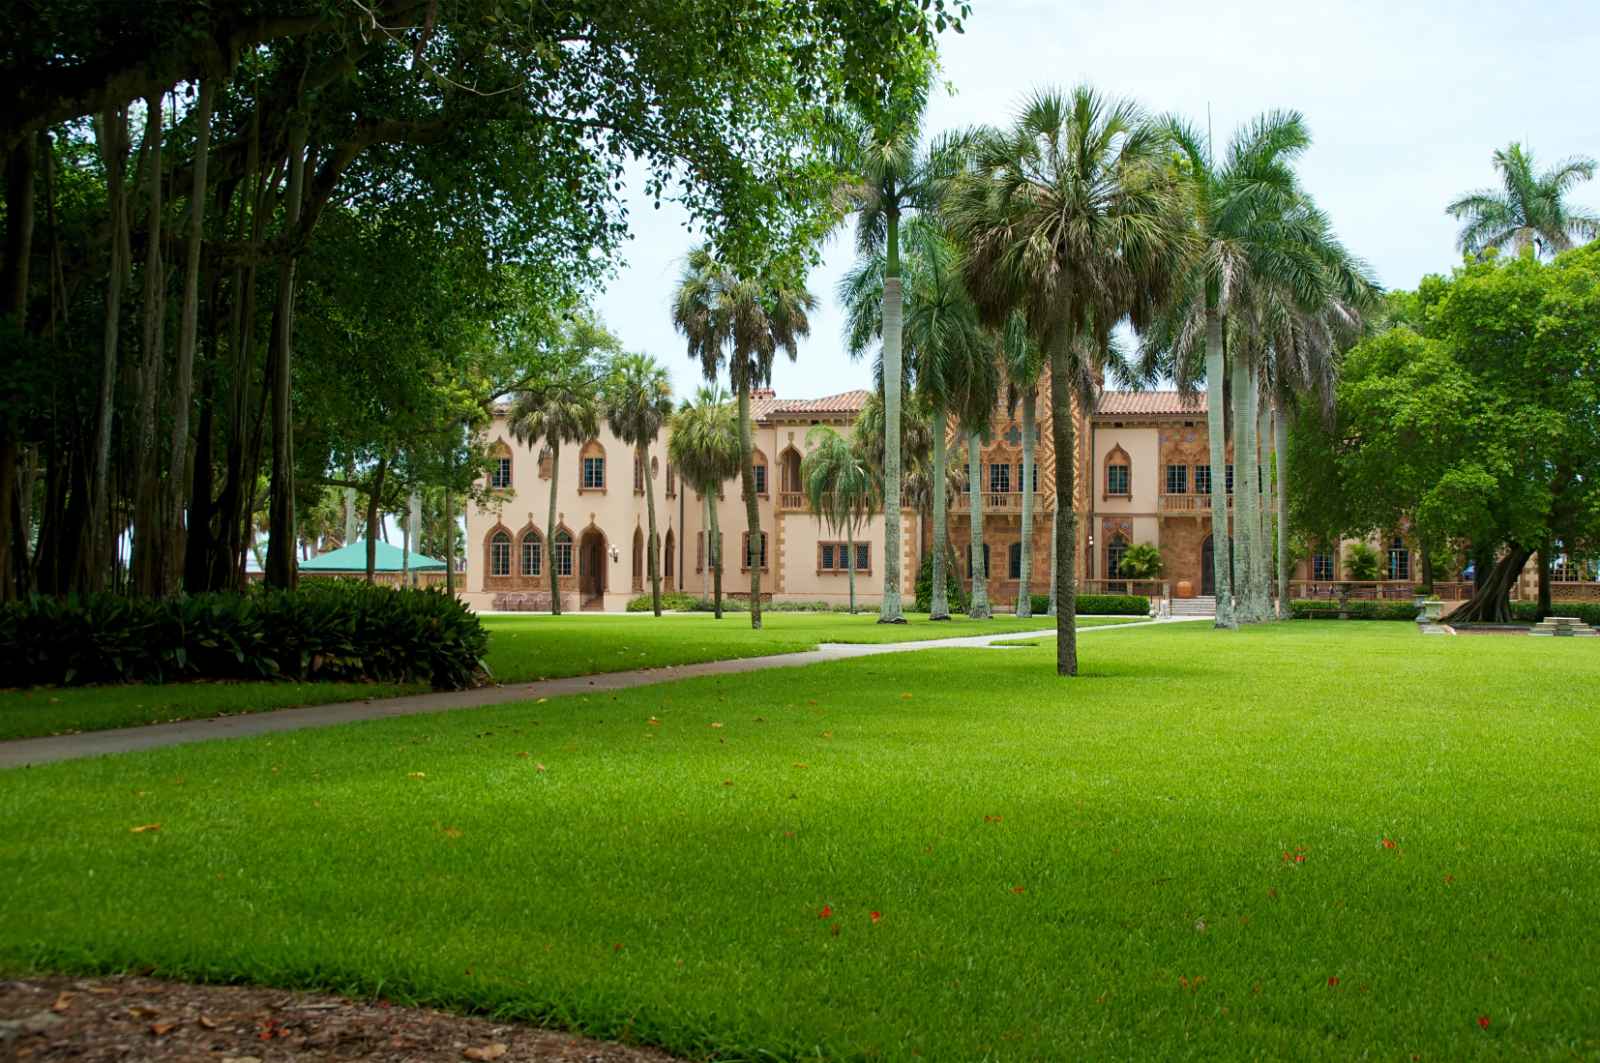 Where to Stay in Sarasota Whitfield-Sapphire Shores Ringling Circus Museum